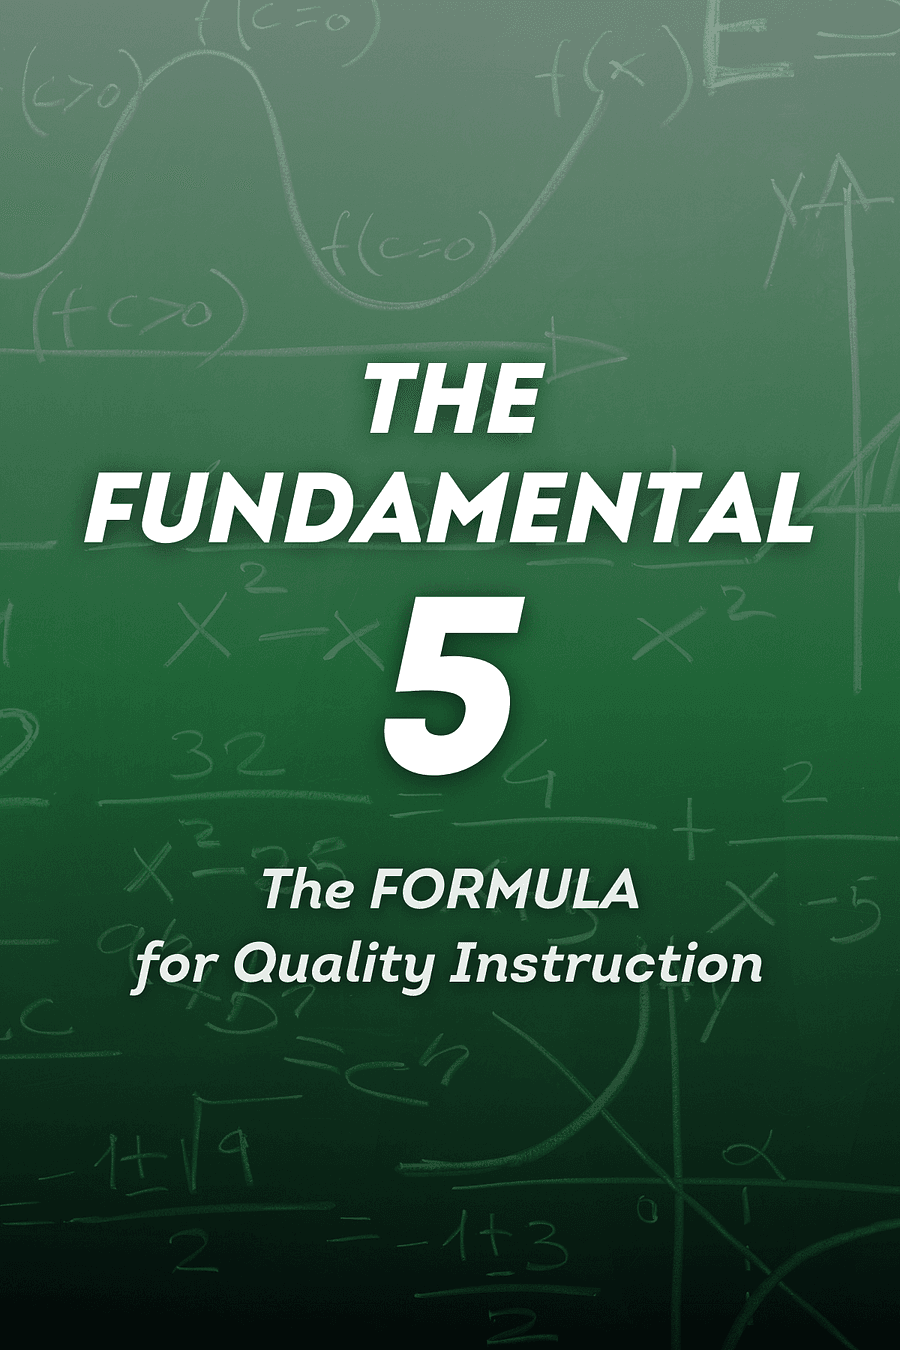 The Fundamental 5 by Sean Cain, Mike Laird - Book Summary